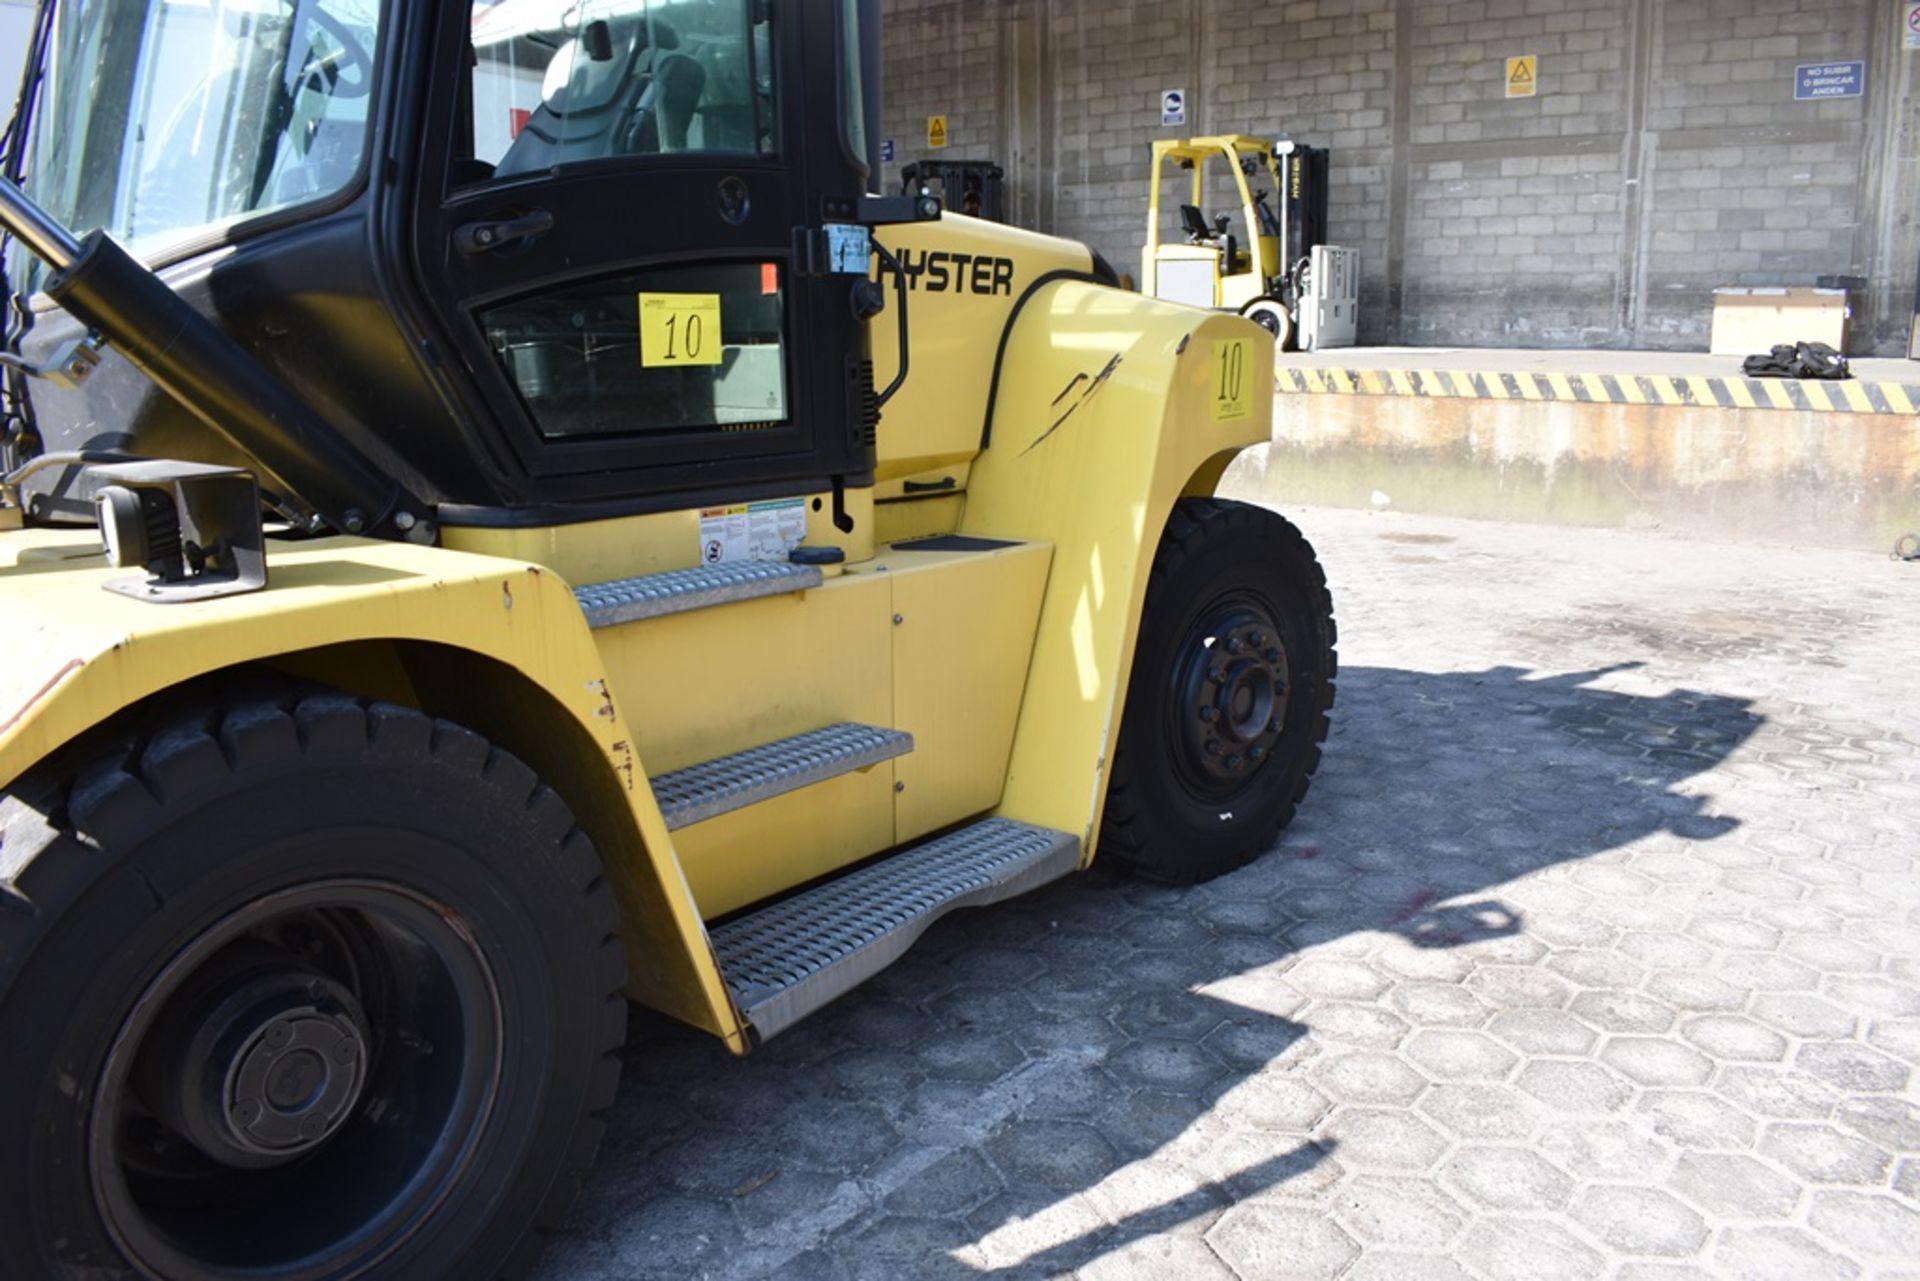 Hyster Forklift, model H210HD2, year 2017, 19,100 lb capacity, 2450 hours - Image 65 of 131